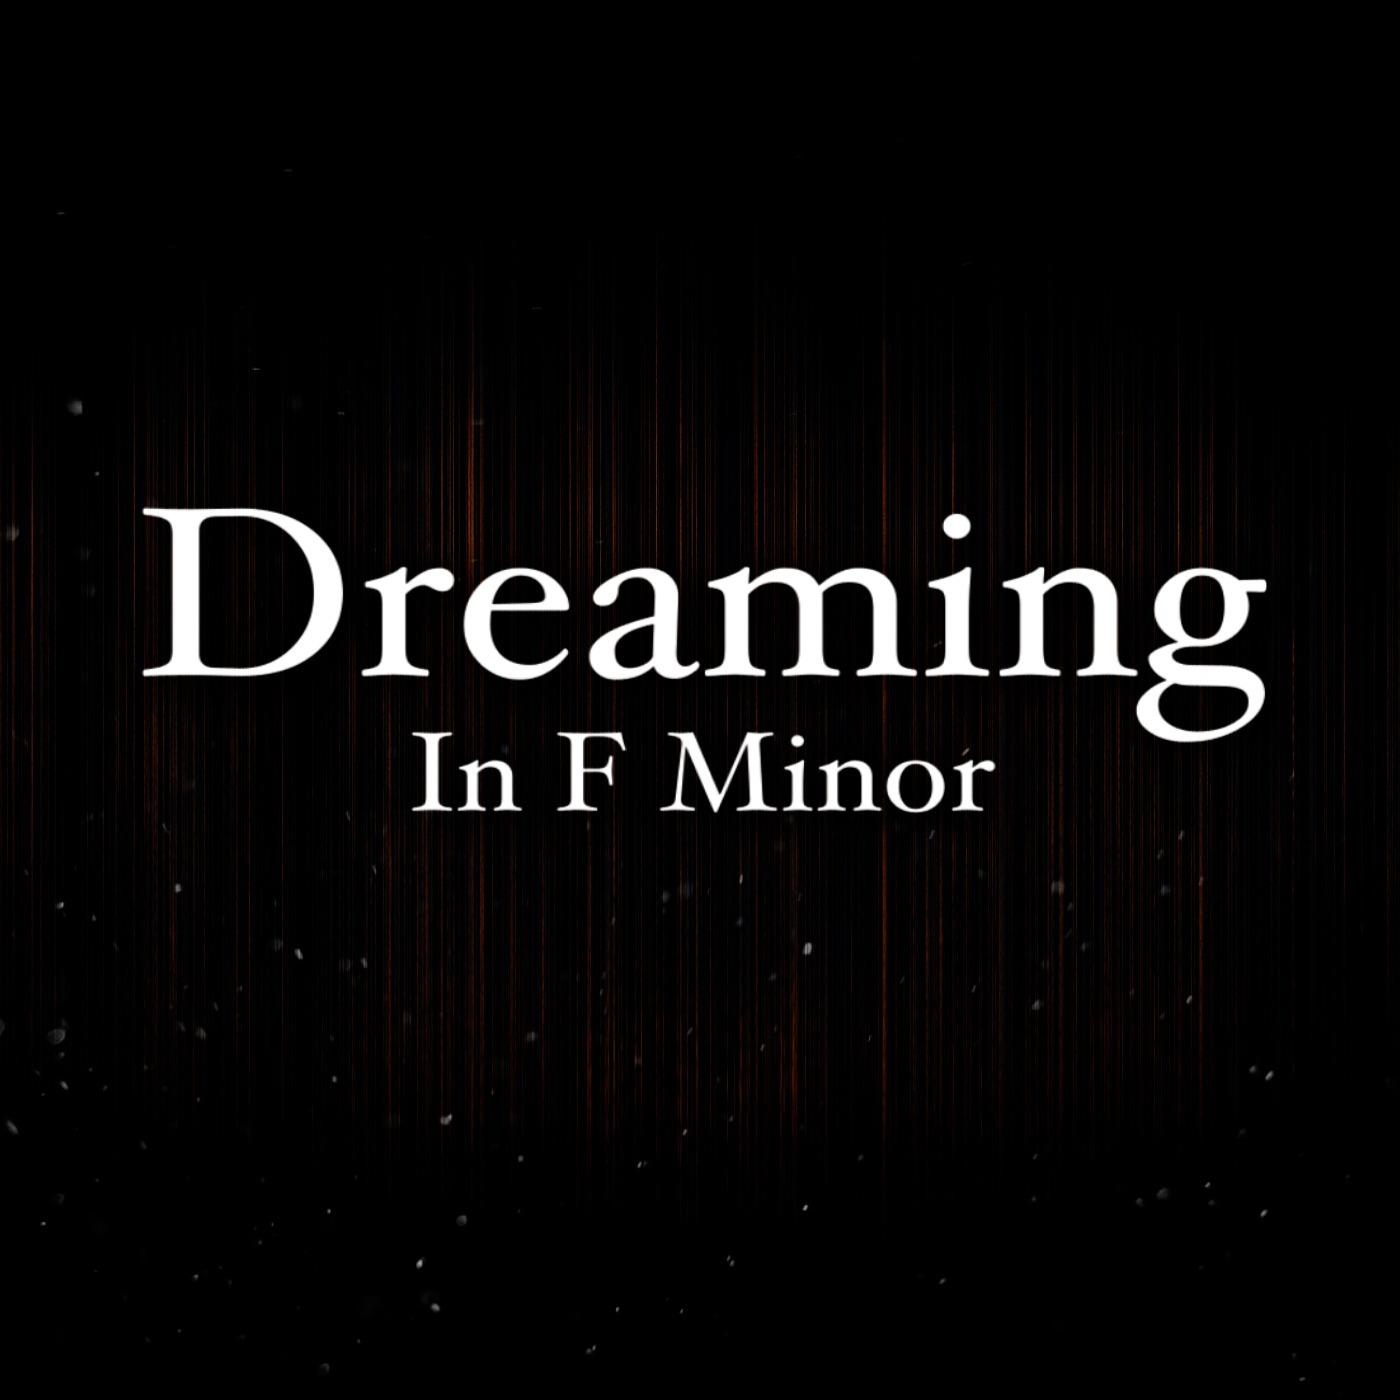 Dreaming In F Minor